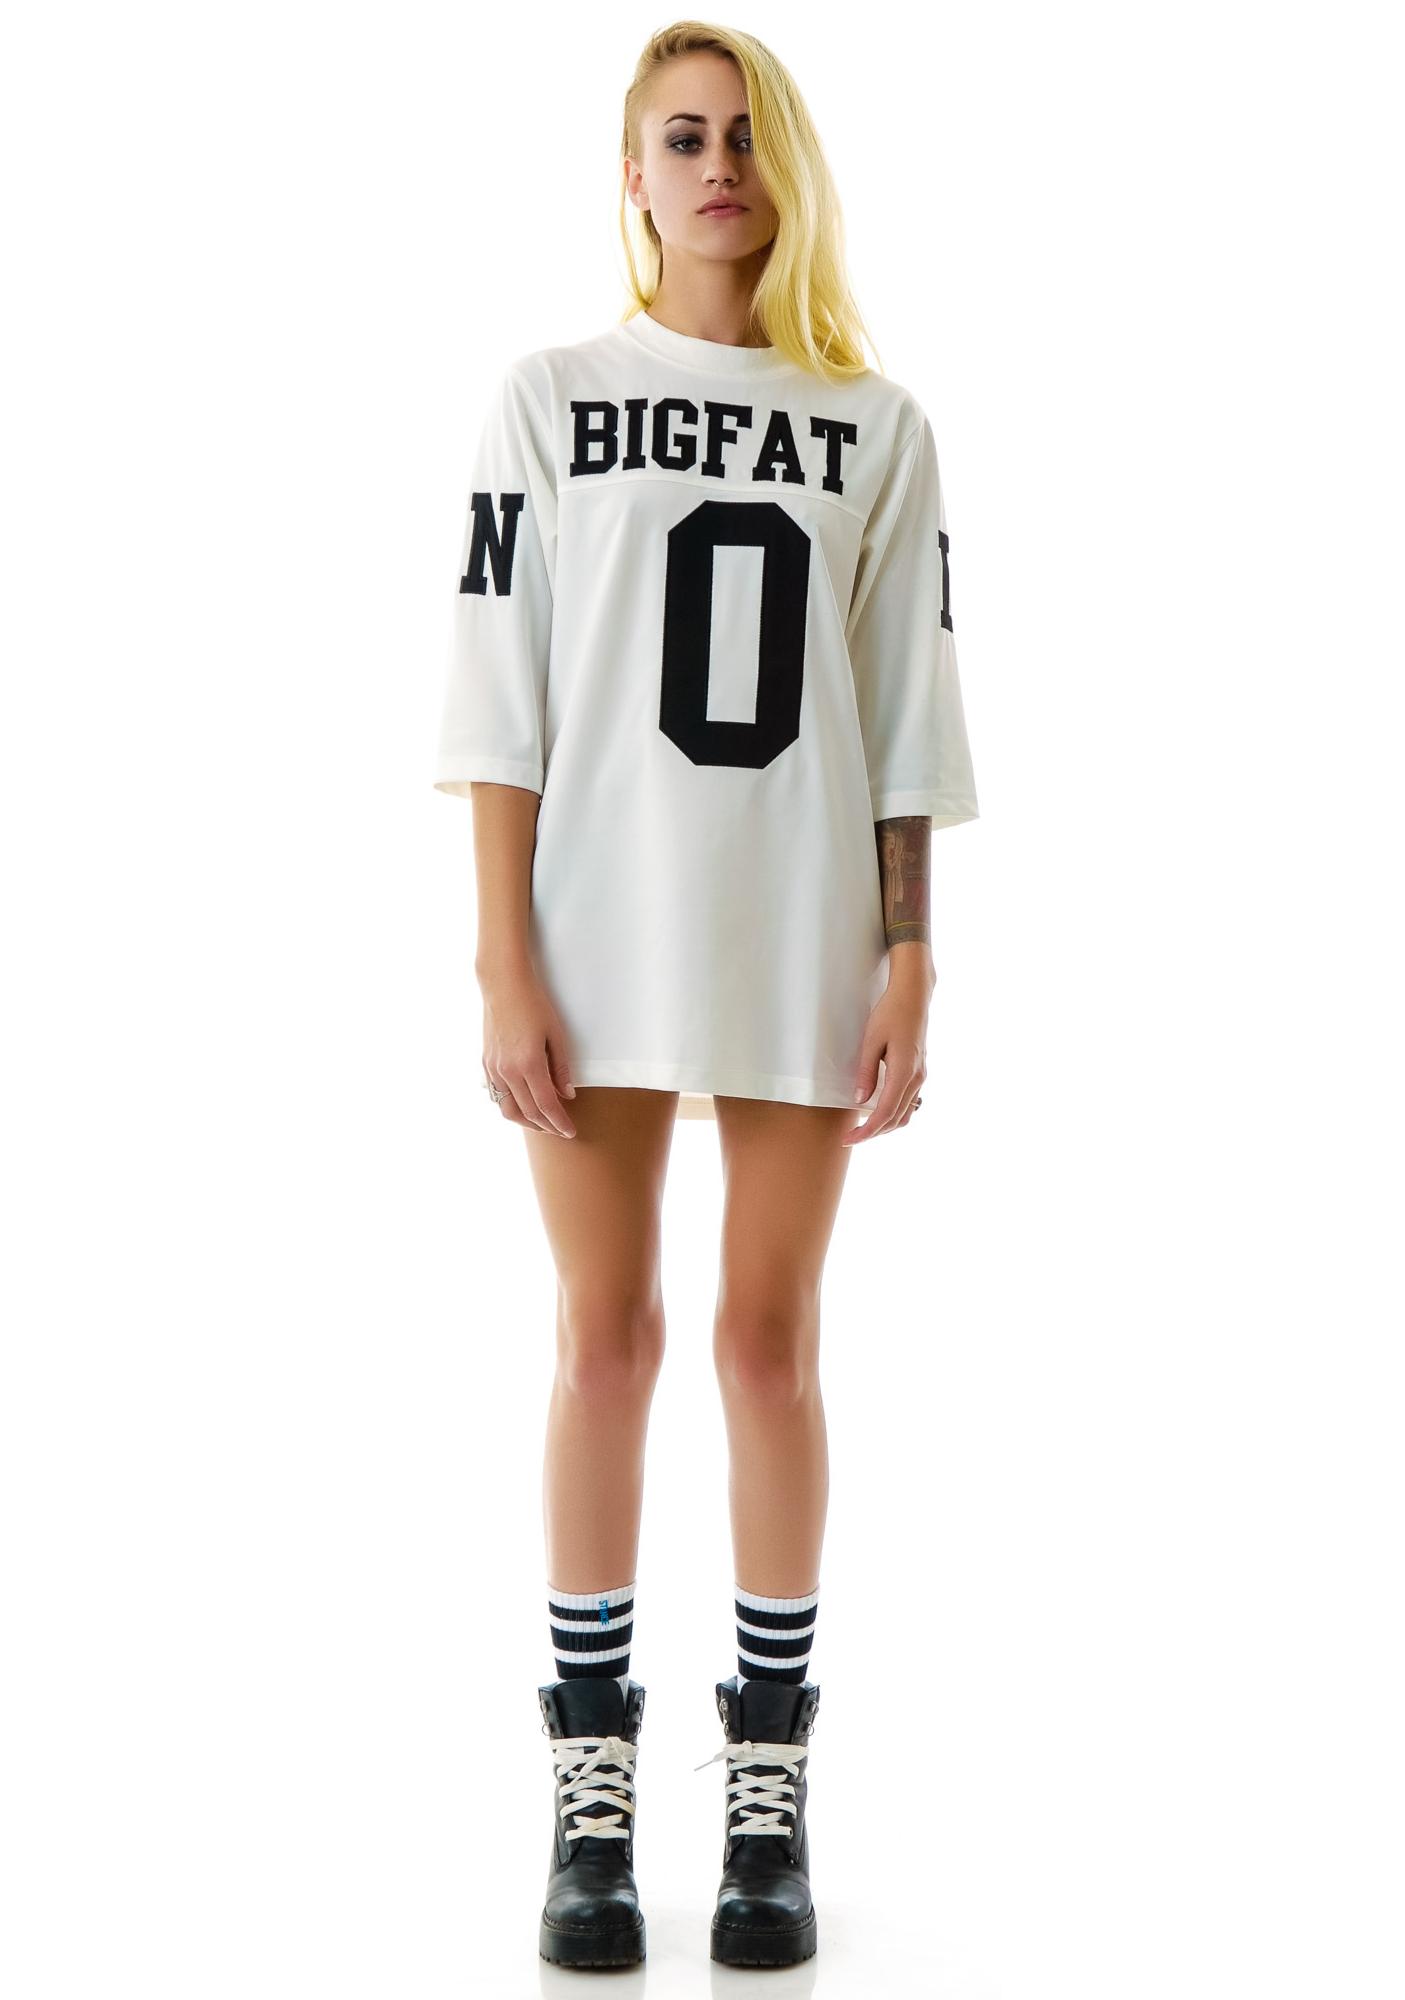 unif jersey